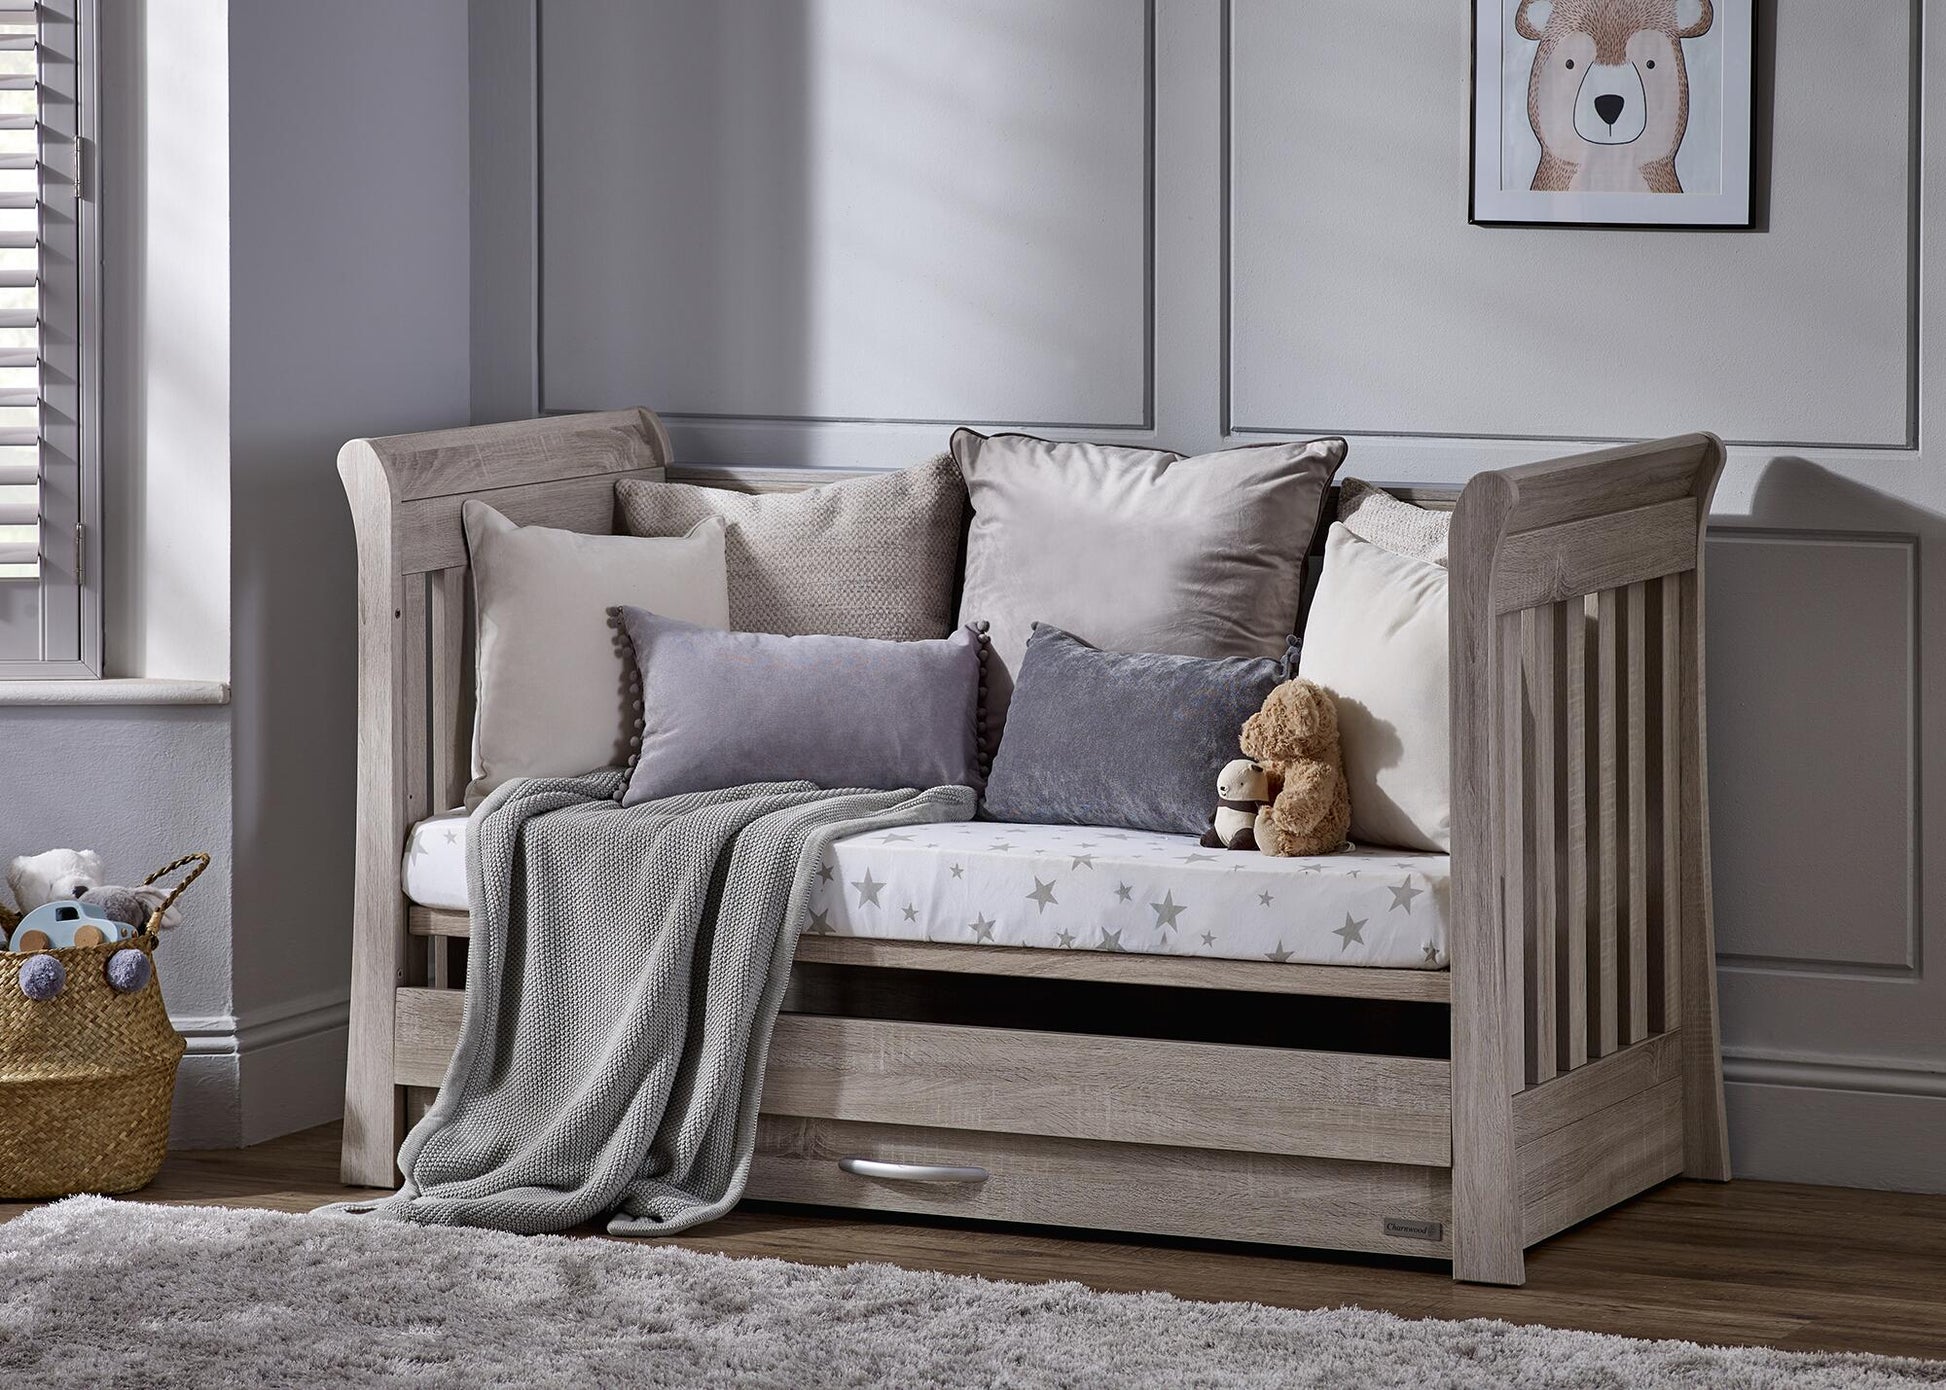 BabyStyle Noble Cot Bed-1